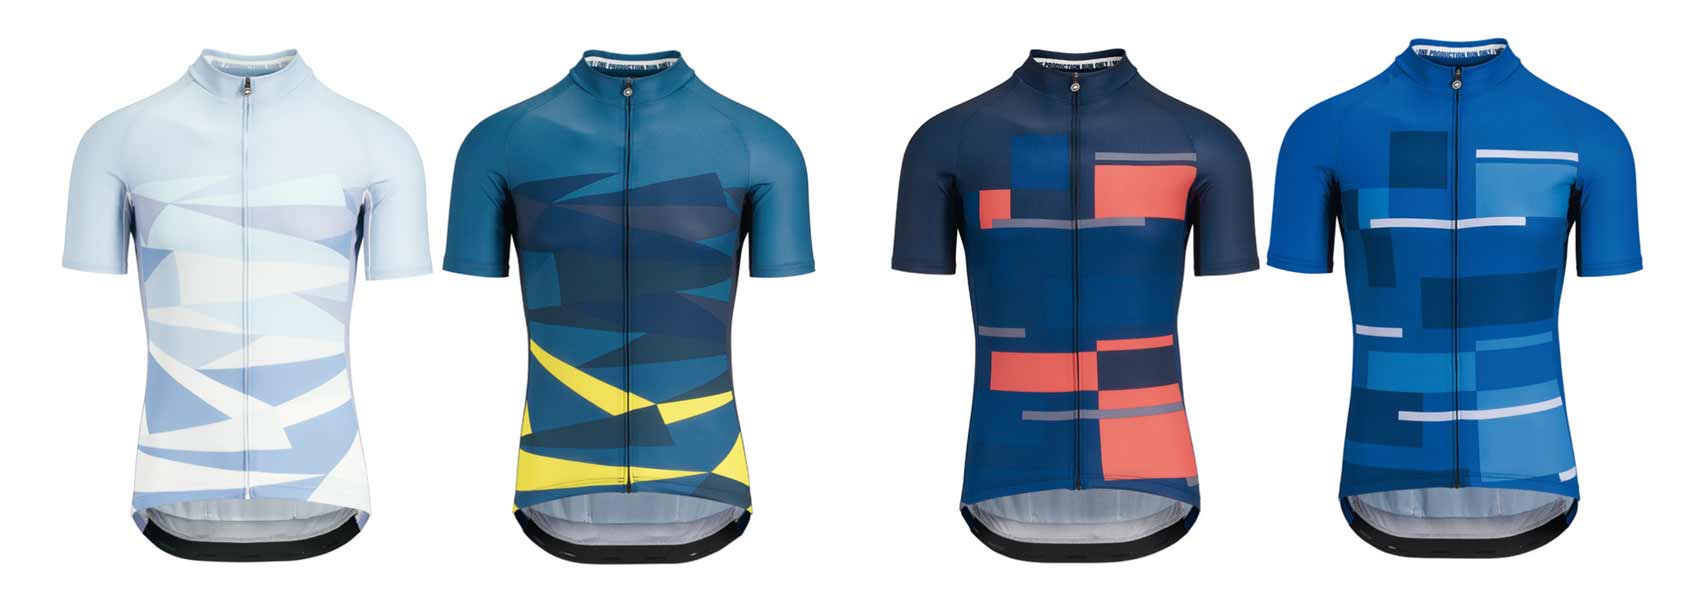 Assos and Luis Fernandez jointly develop new jerseys